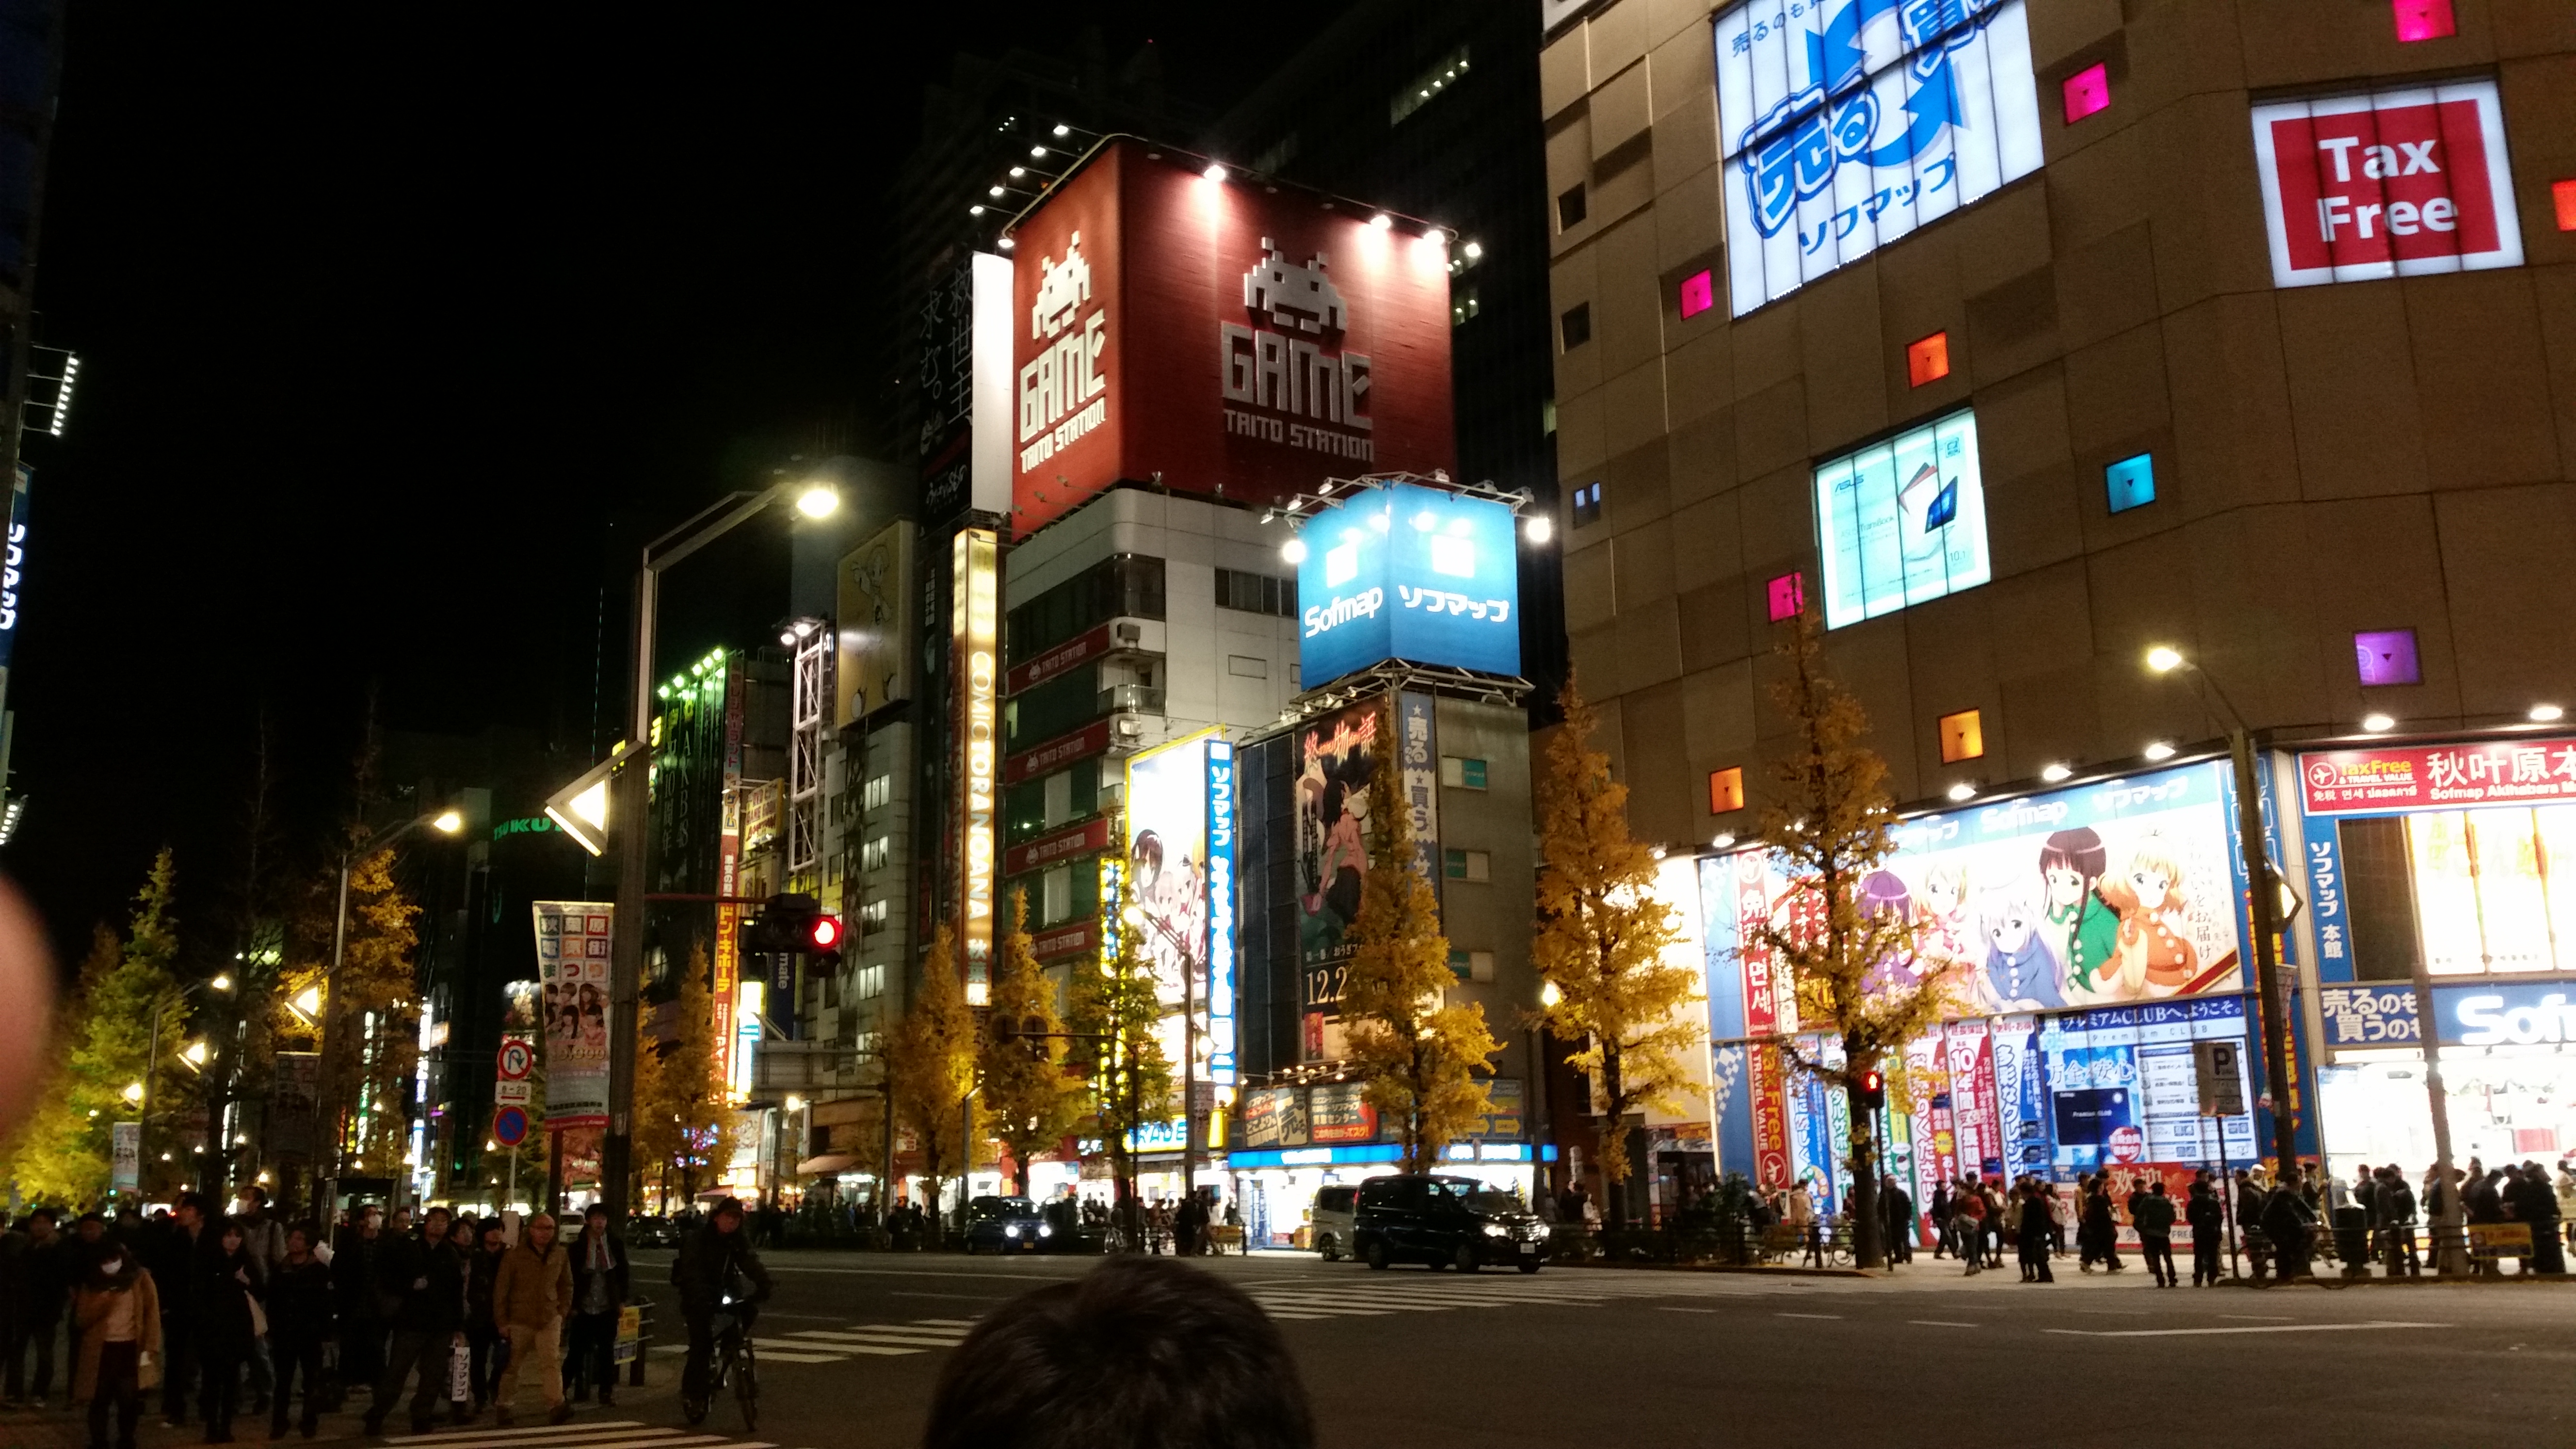 Best 5 Retro Game Stores in Akihabara: Japan Arcades and More